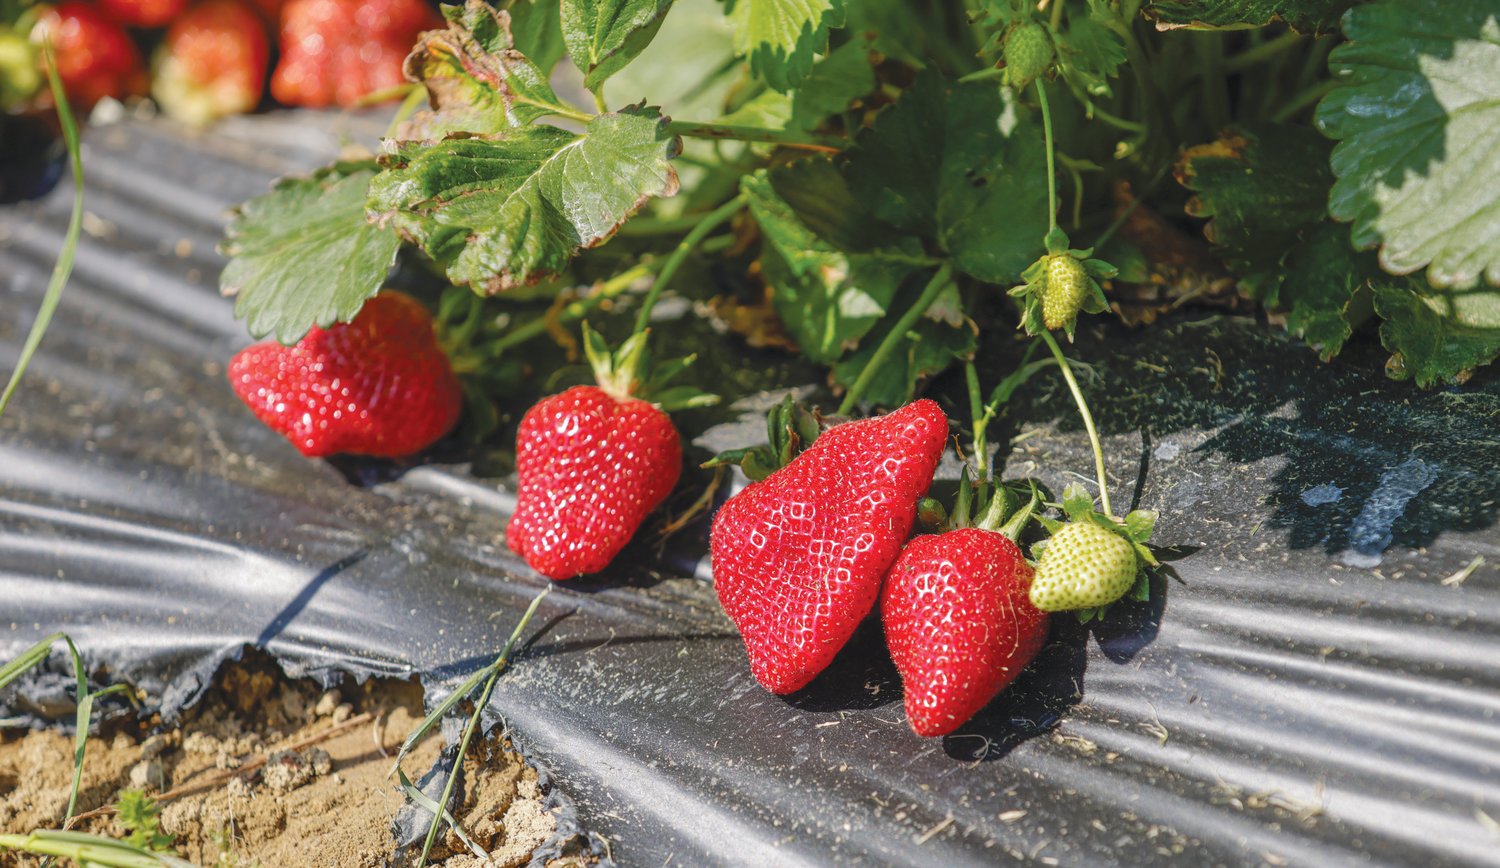 Late April marks the beginning of strawberry season for Kildee Farms in Ramseur. Growing the berries is a technical process, and 'people don't realize how much science and care it takes,' said owner Michael Beal.